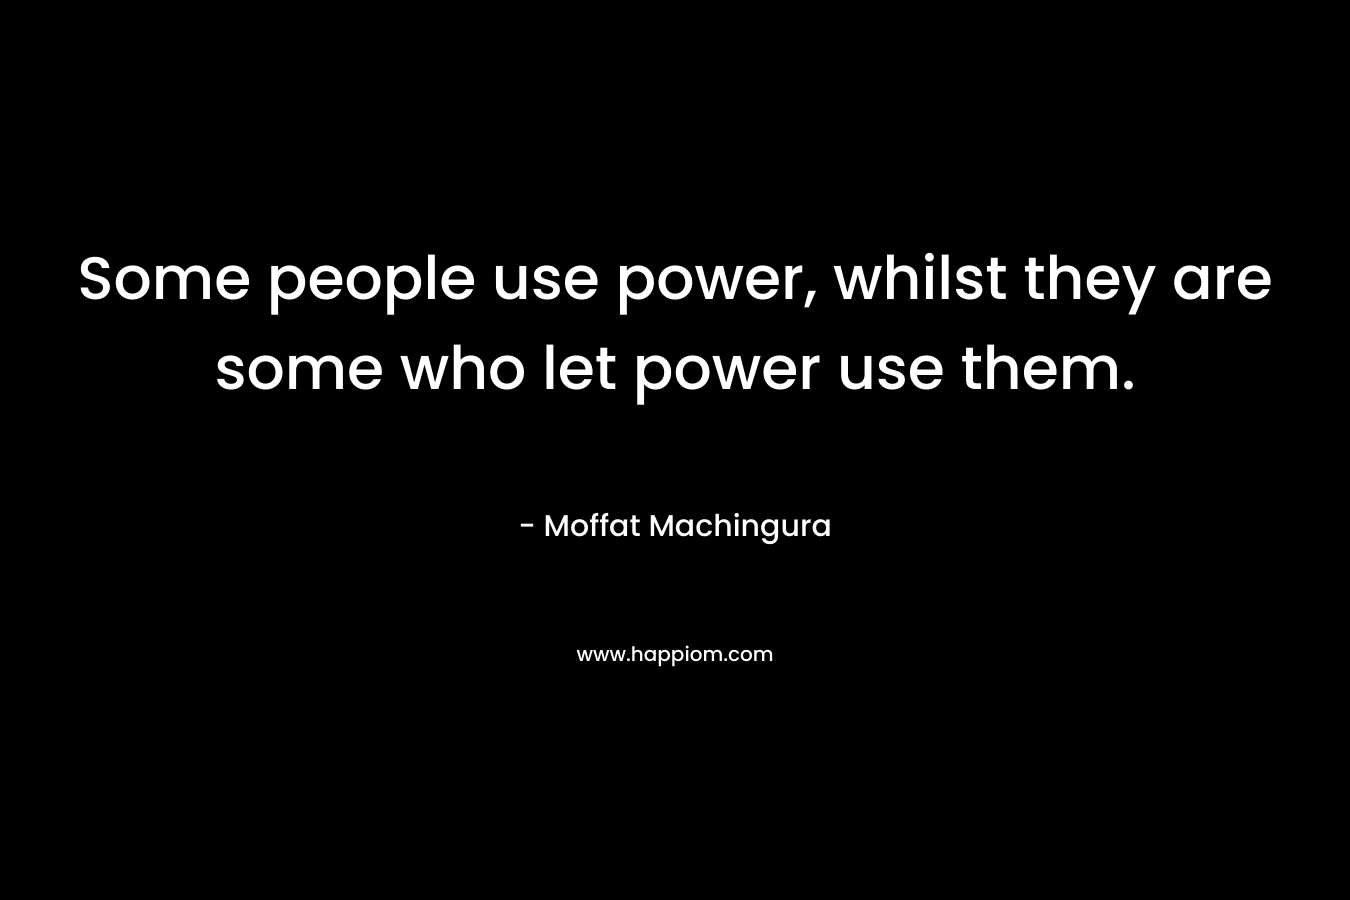 Some people use power, whilst they are some who let power use them.